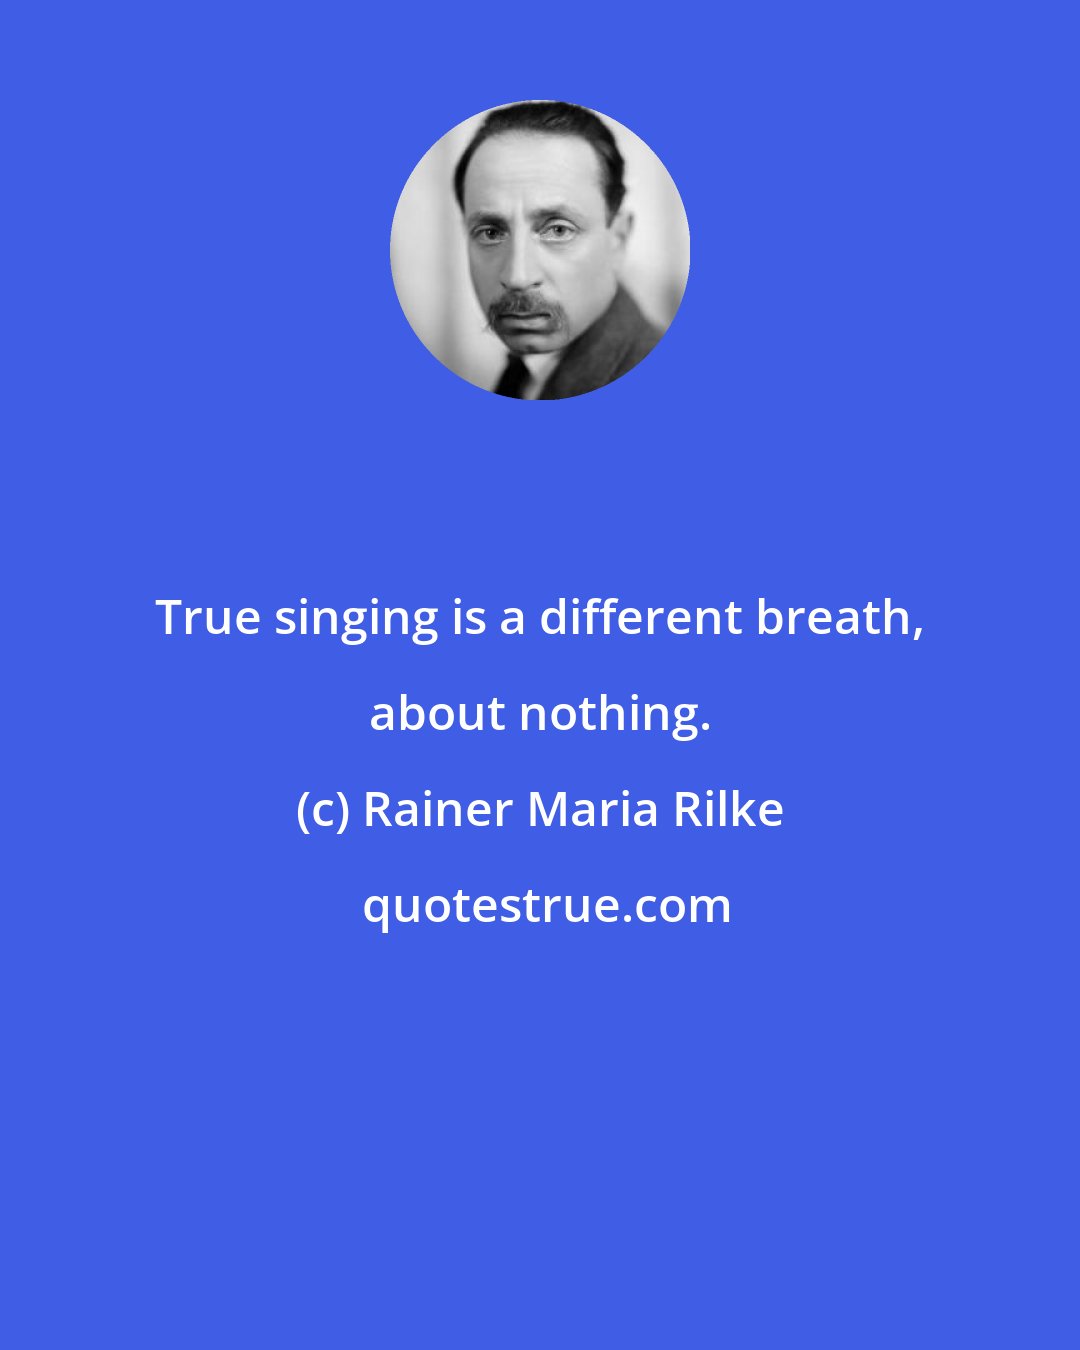 Rainer Maria Rilke: True singing is a different breath, about nothing.